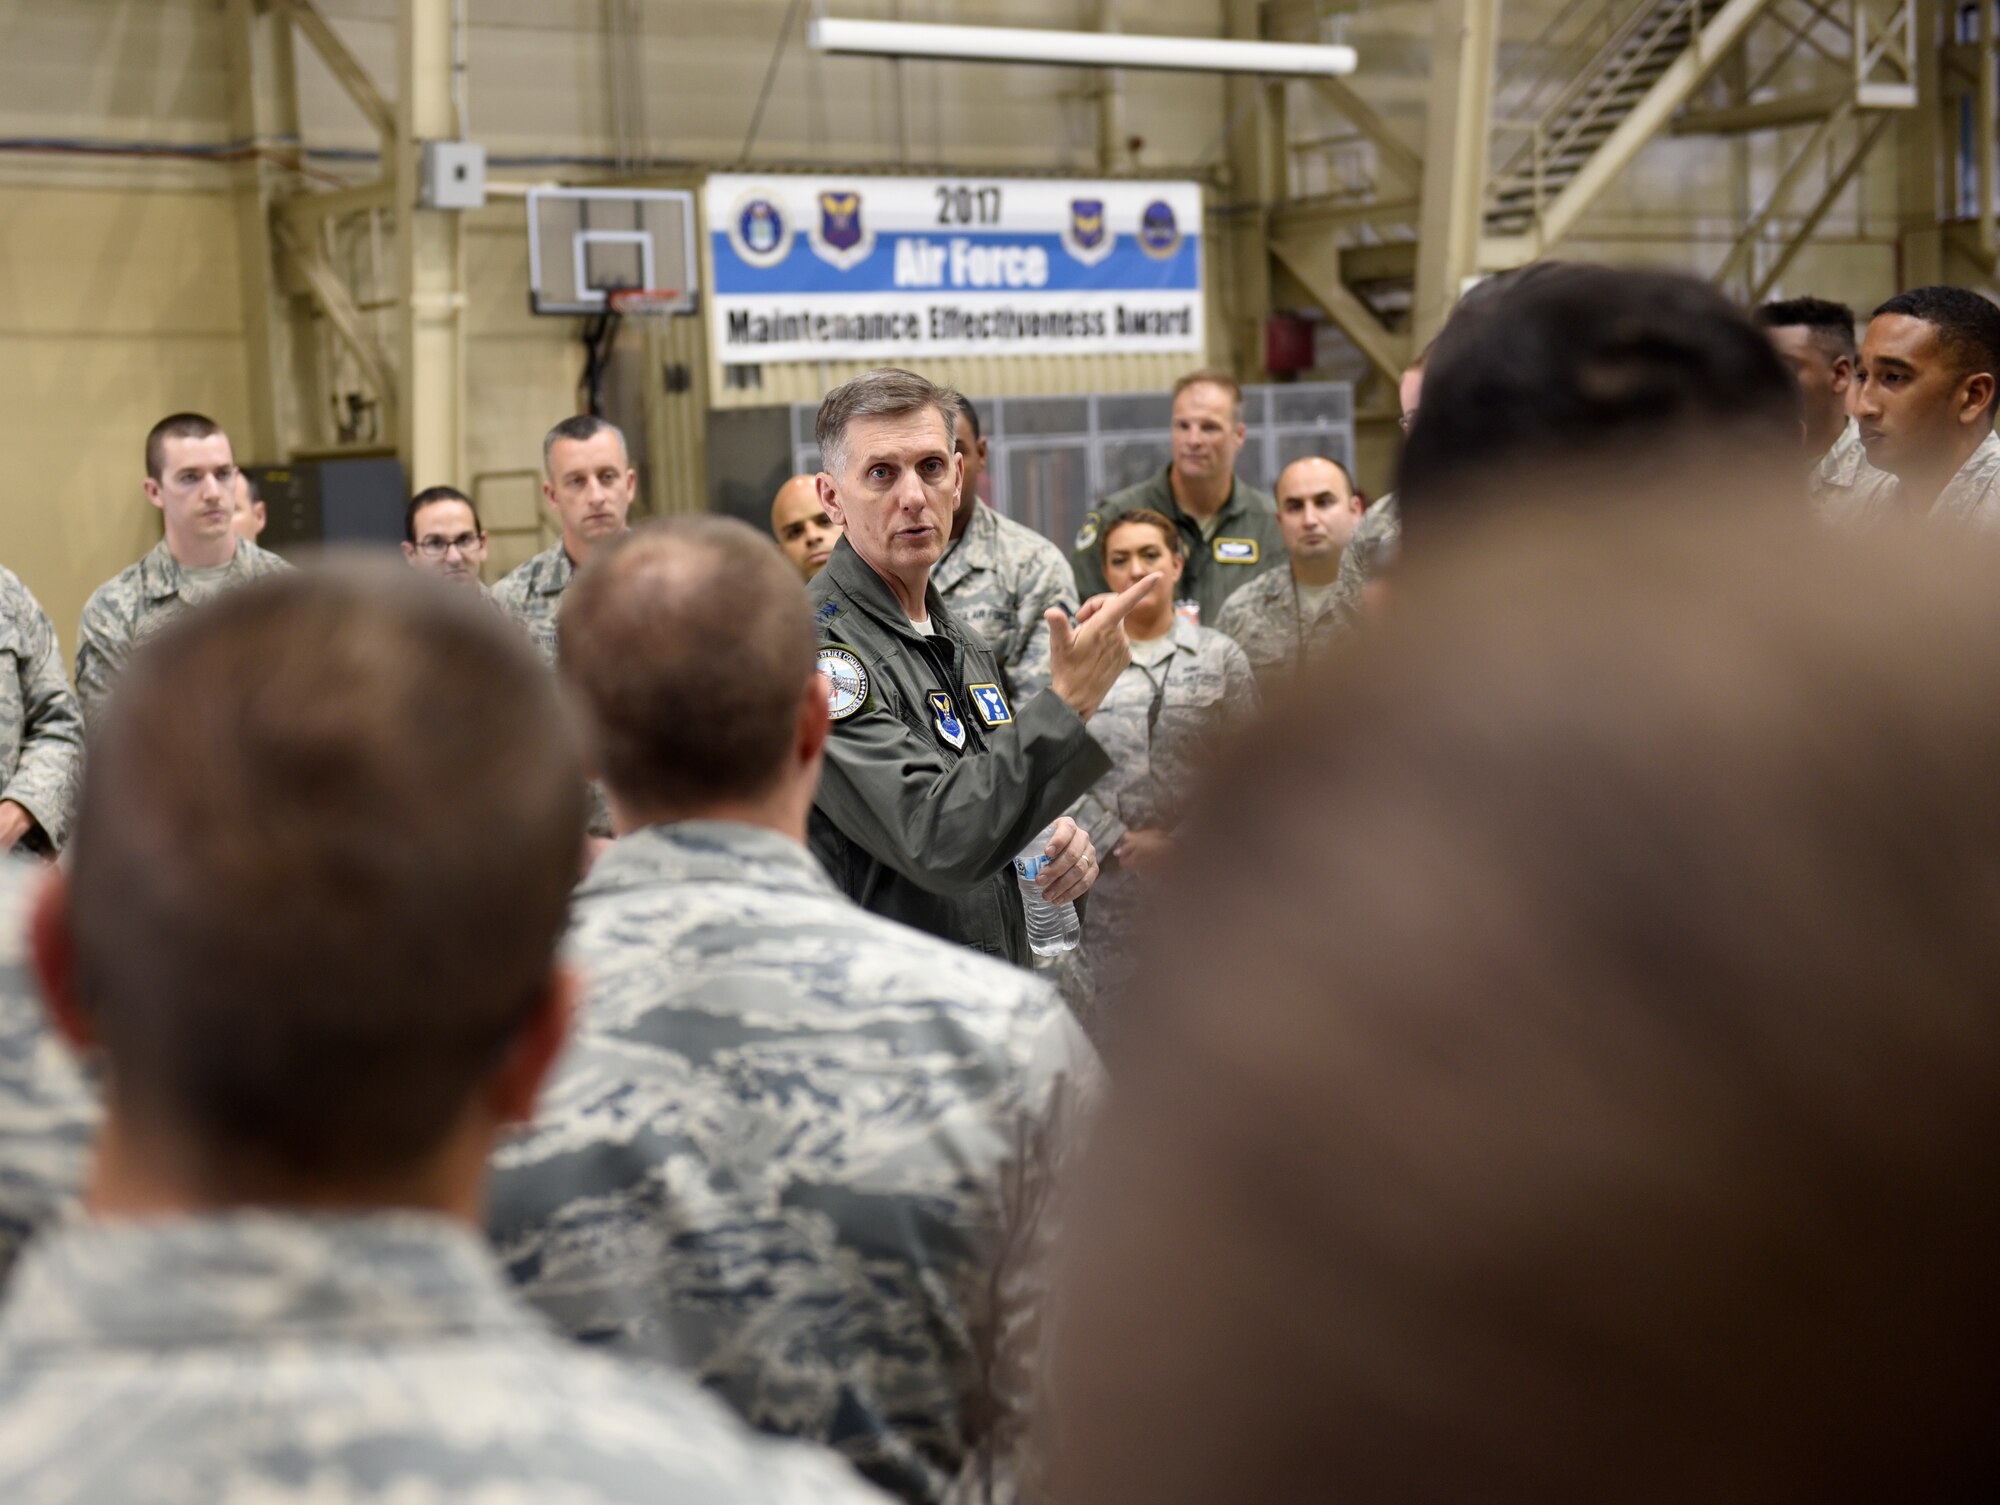 U.S. Air Force Gen. Timothy Ray, Air Force Global Strike Command commander, addresses 595th Aircraft Maintenance Squadron members at Offutt Air Force Base, Nebraska Sept. 13, 2018. The maintainers work and fly on the E-4B aircraft which is a militarized version of the Boeing 747-200. It provides a highly-survivable, command, control and communications center to direct U.S. forces, execute emergency war orders and coordinate actions by civil authorities in case of national emergency. (U.S. Air Force photo by Drew Nystrom)